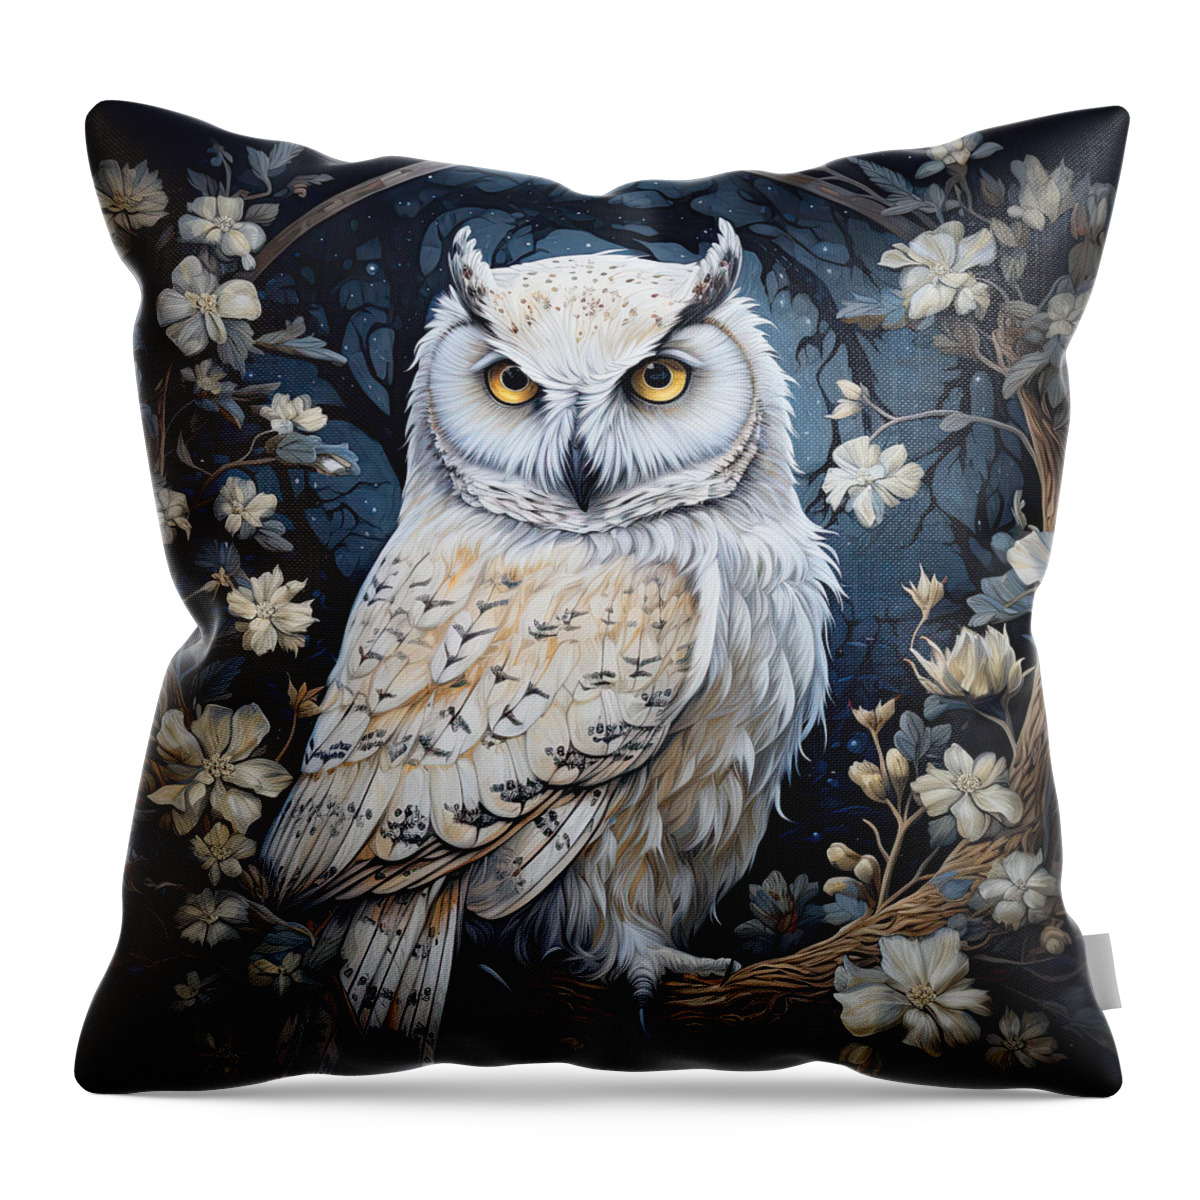 White Owl Throw Pillow featuring the painting A Snowy Stare by Lourry Legarde